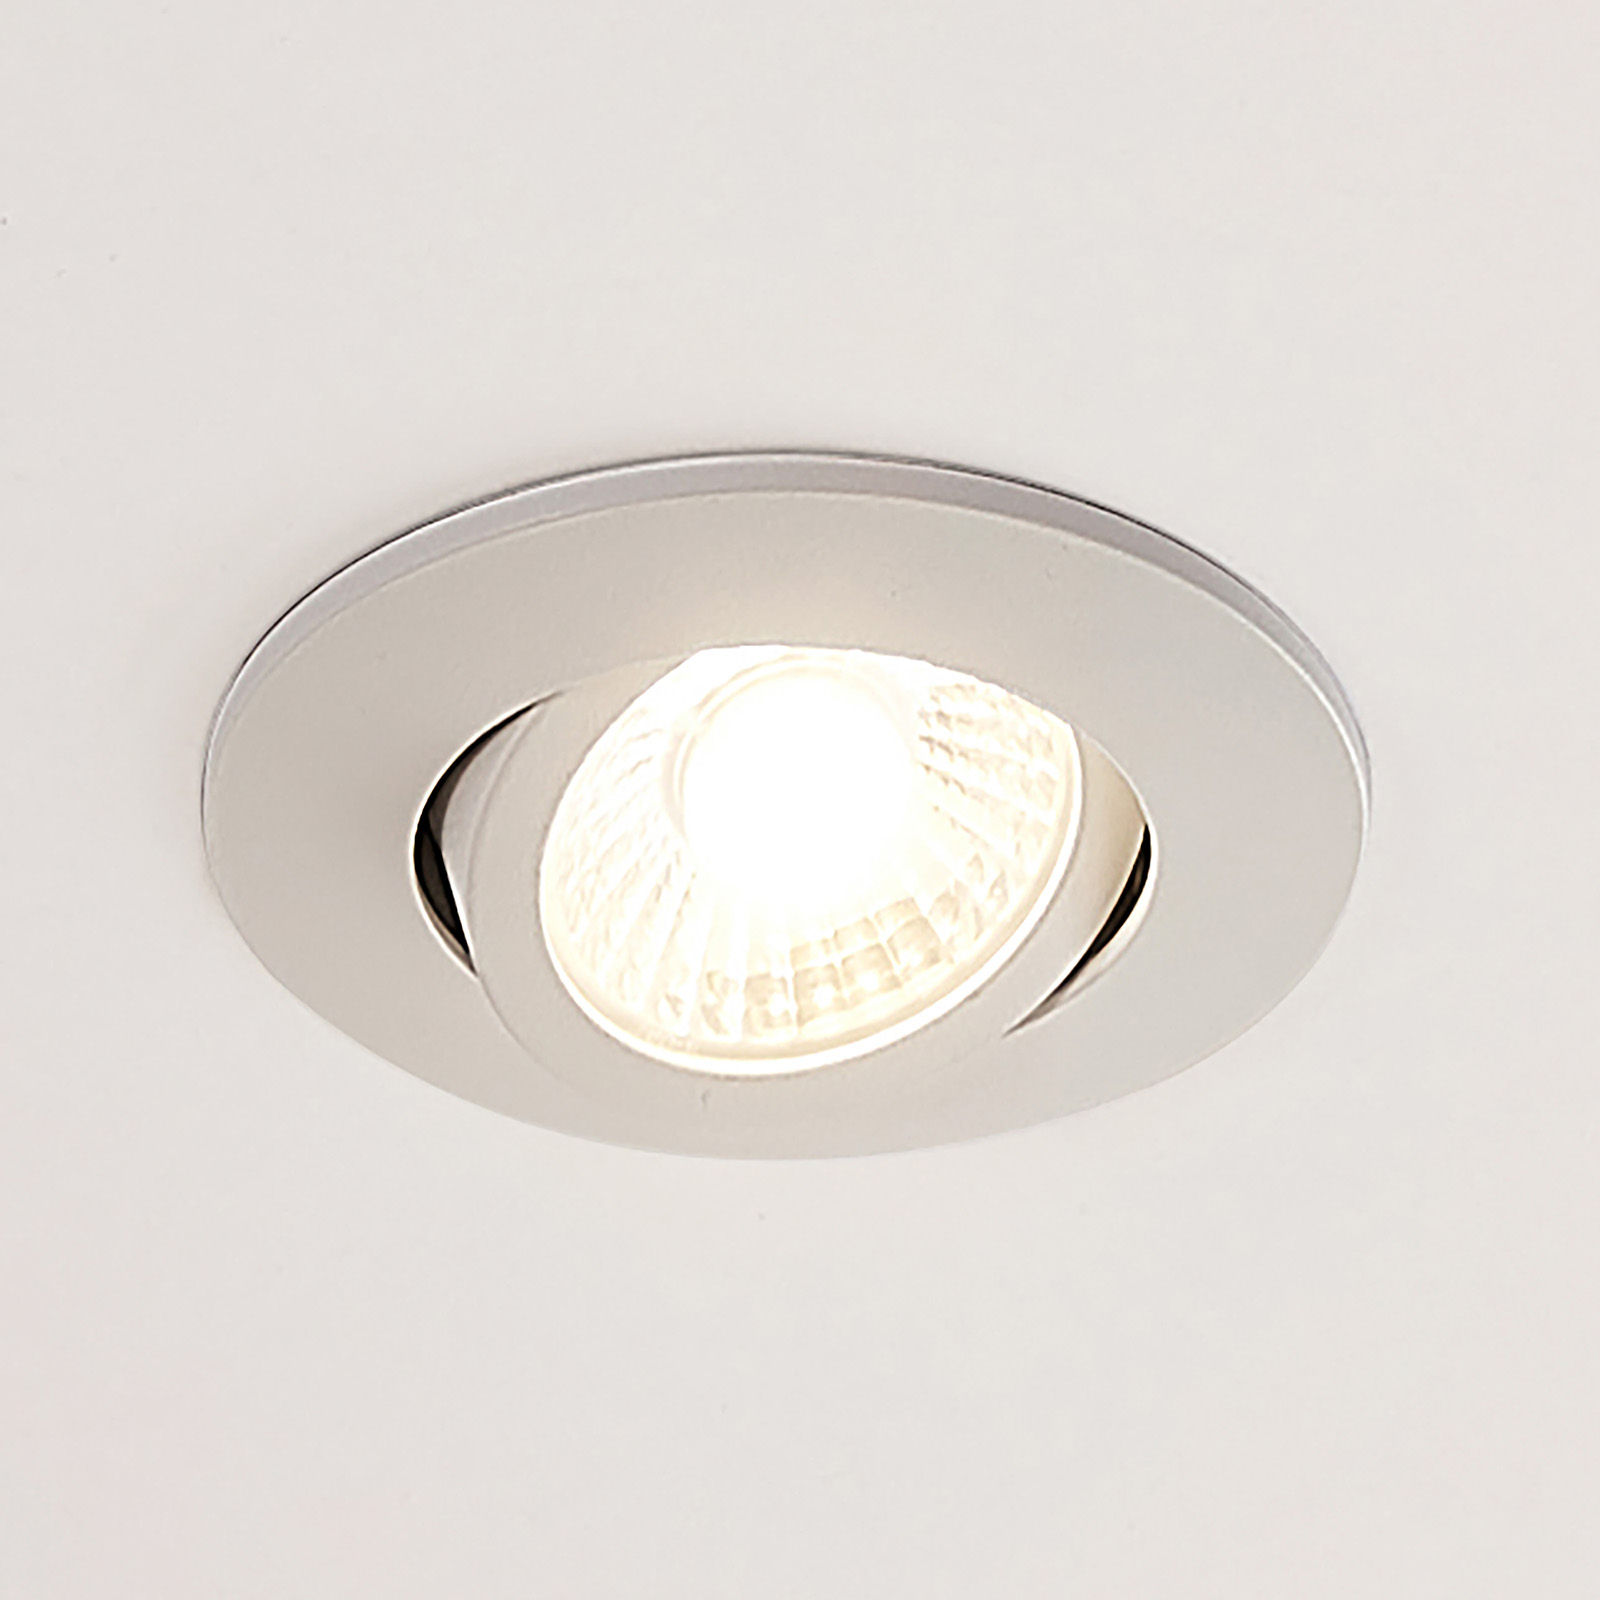 Arcchio Ricals LED-Downlight, dimmbar